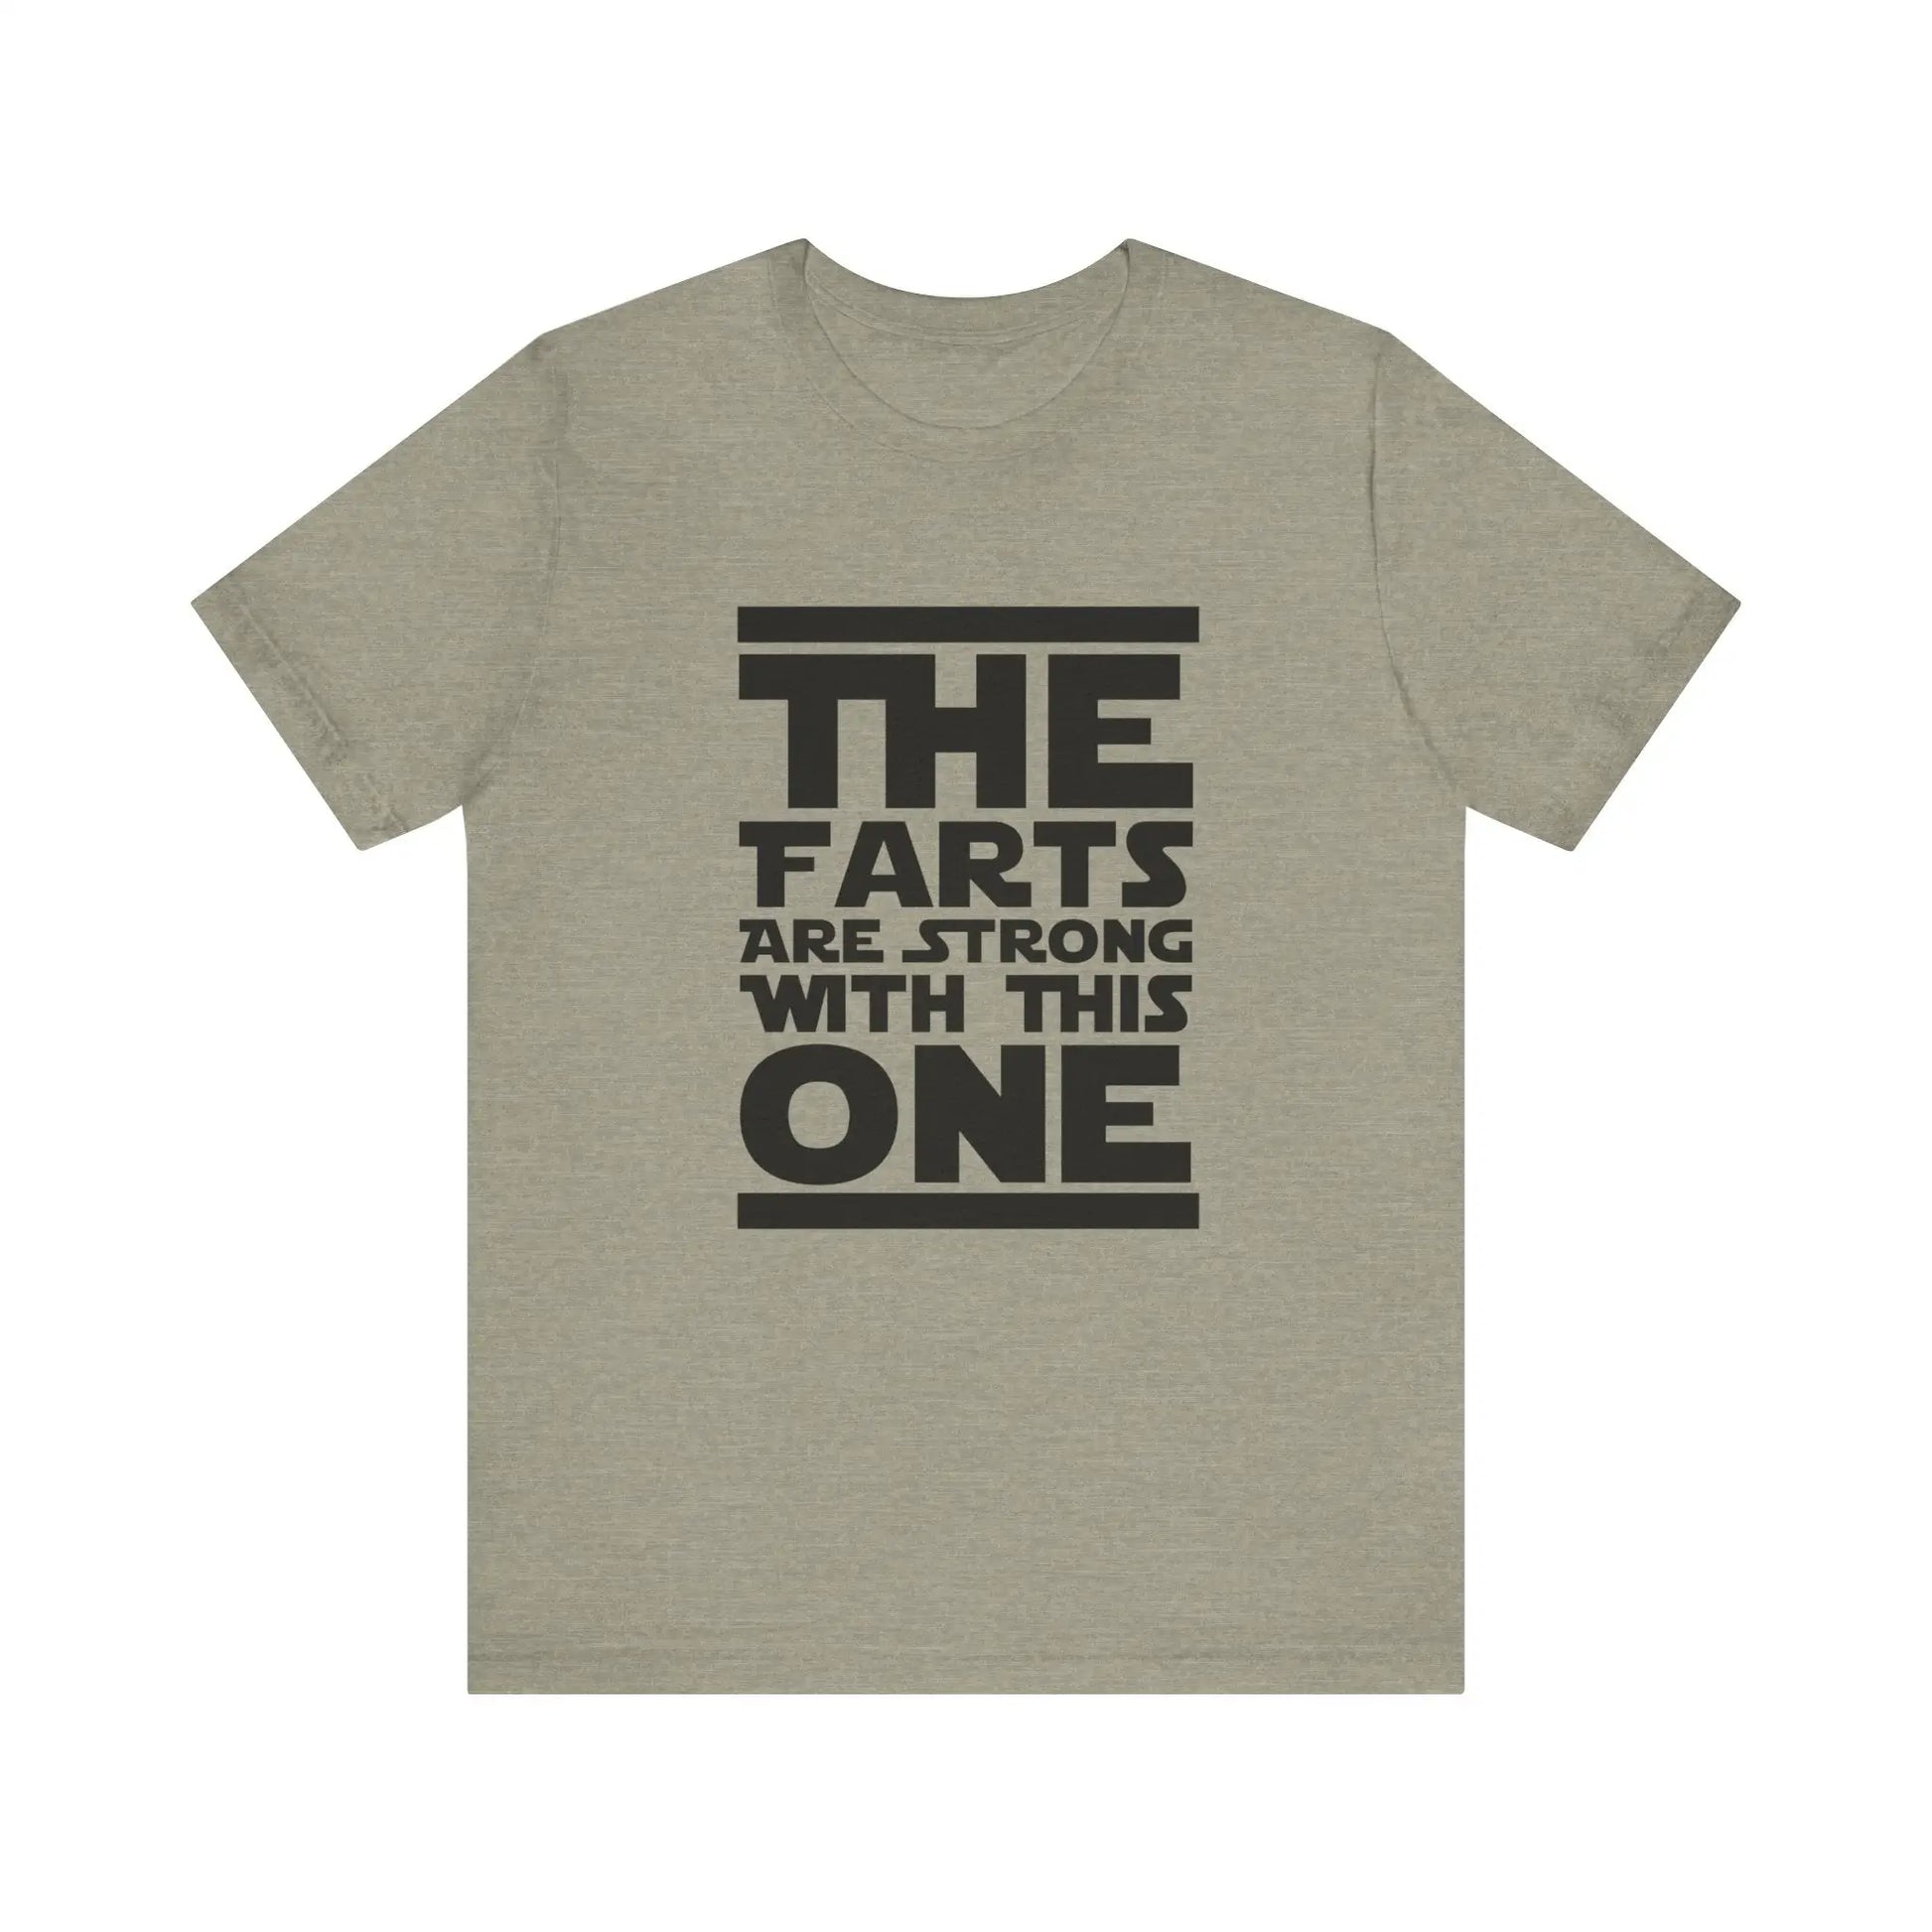 The Farts Are Strong With This One Men's Tee - Wicked Tees